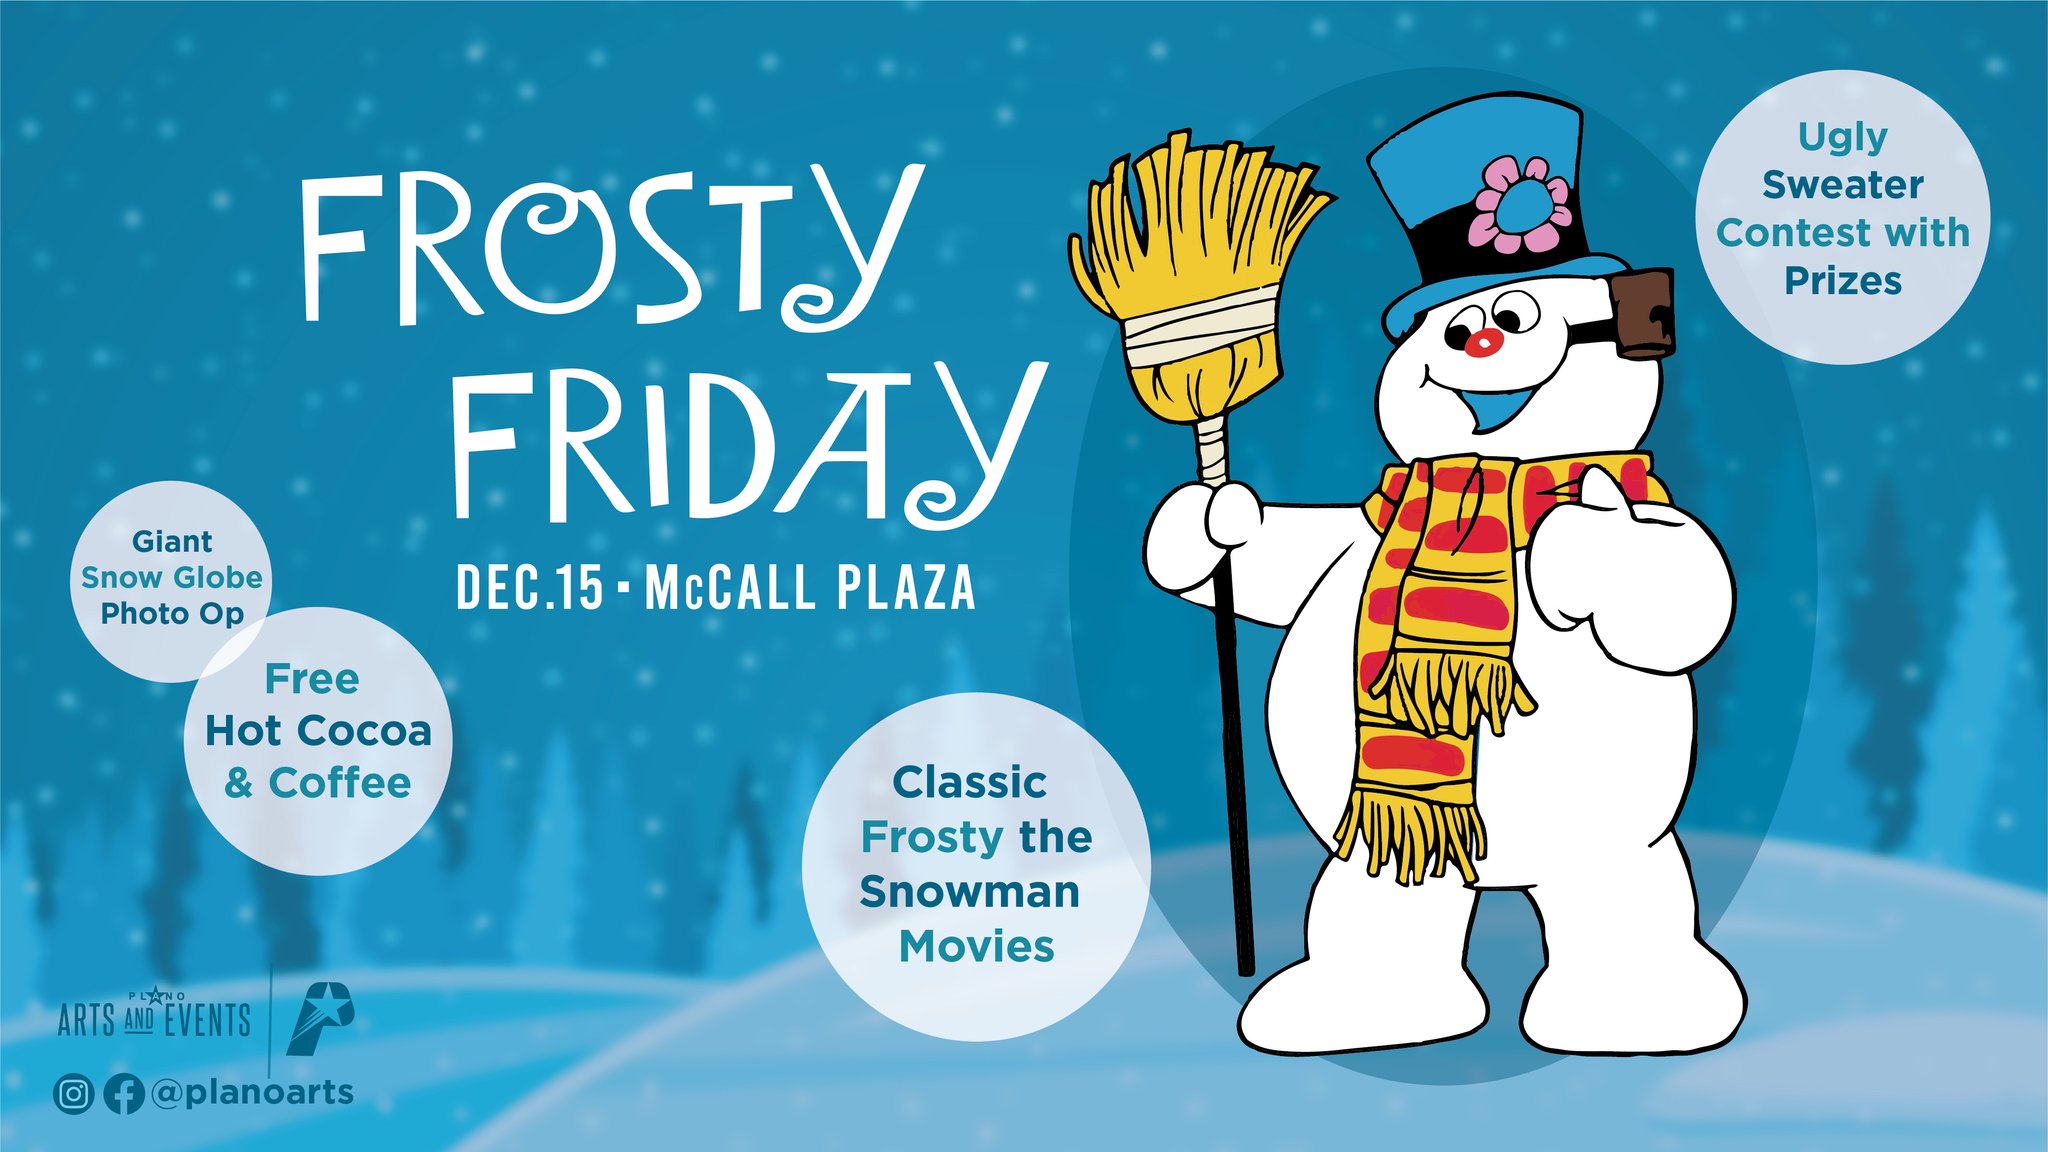 Frosty Friday at McCall Plaza